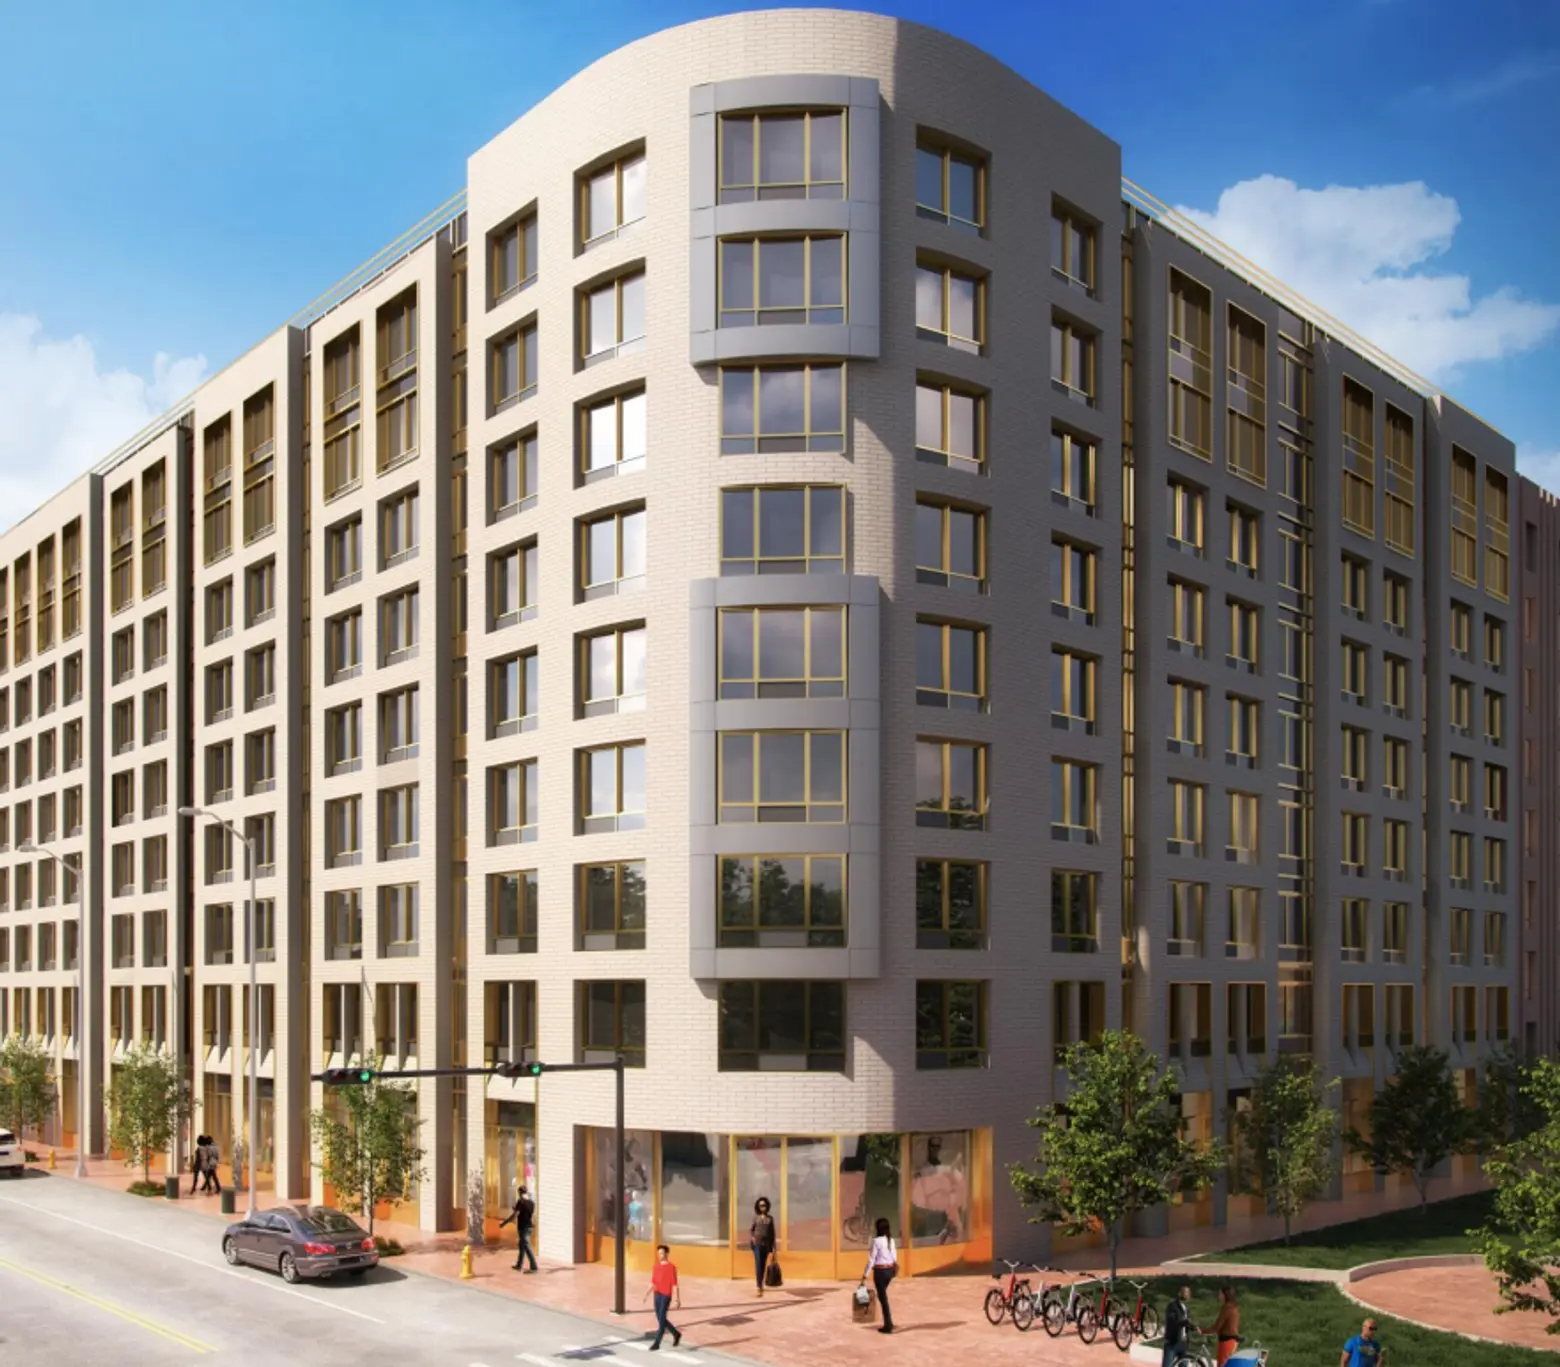 199 affordable apartments available near Jamaica Bay in East New York, from $328/month